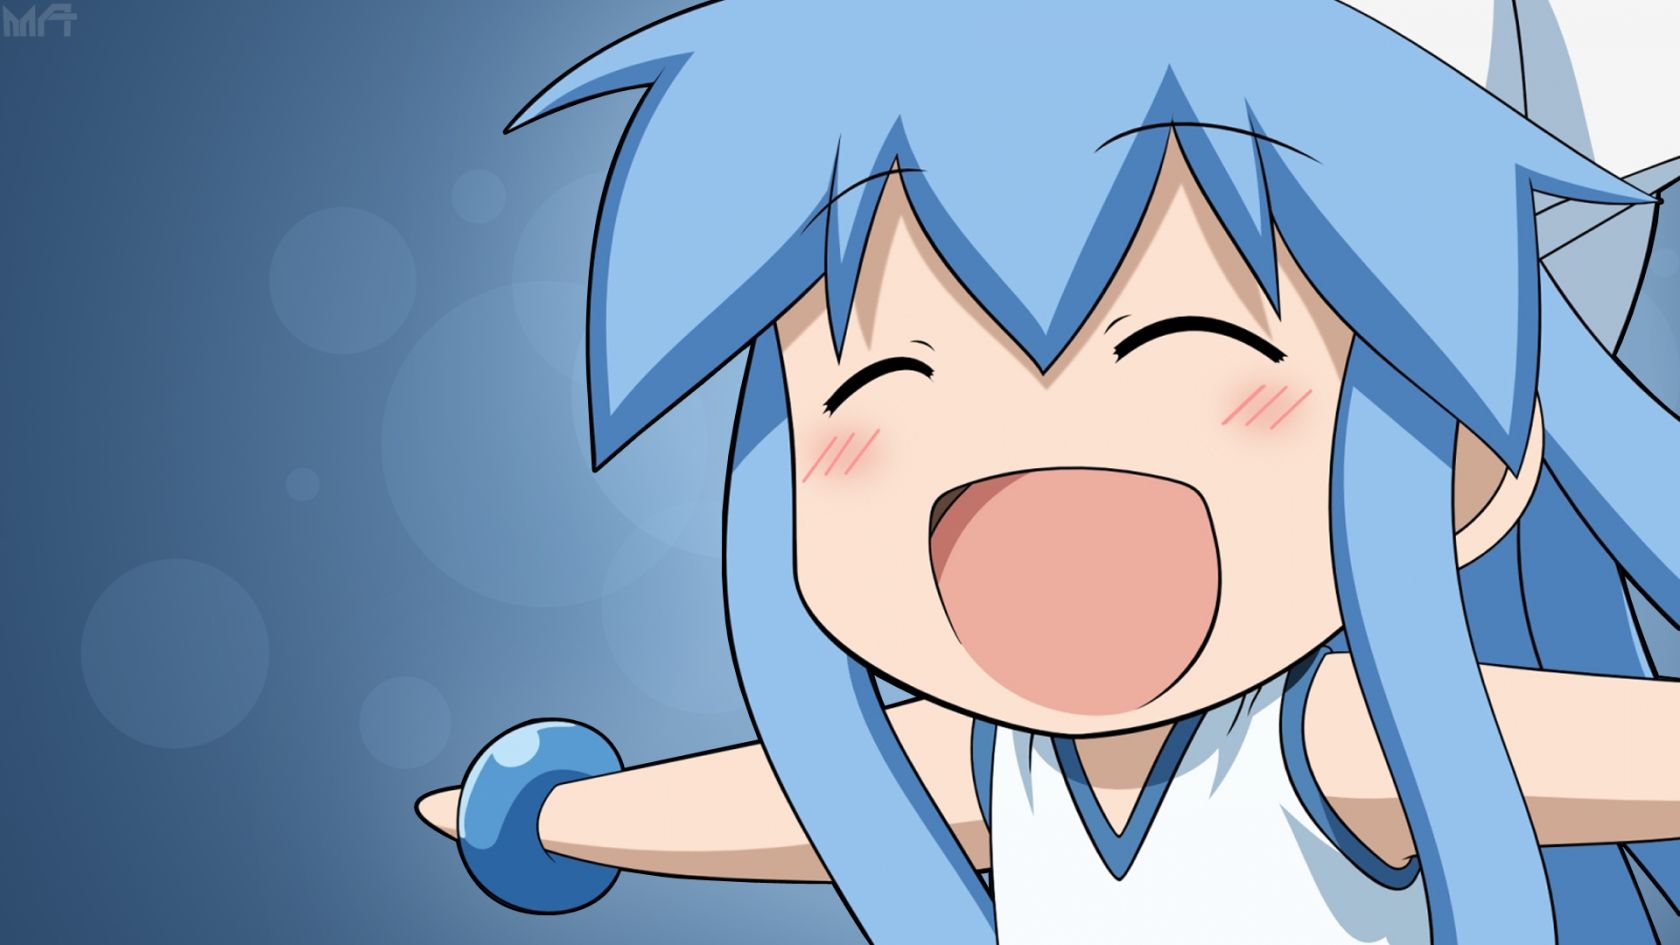 Cute Squid Girl Chibi HD Anime Wallpaper Wallpapers Pictures